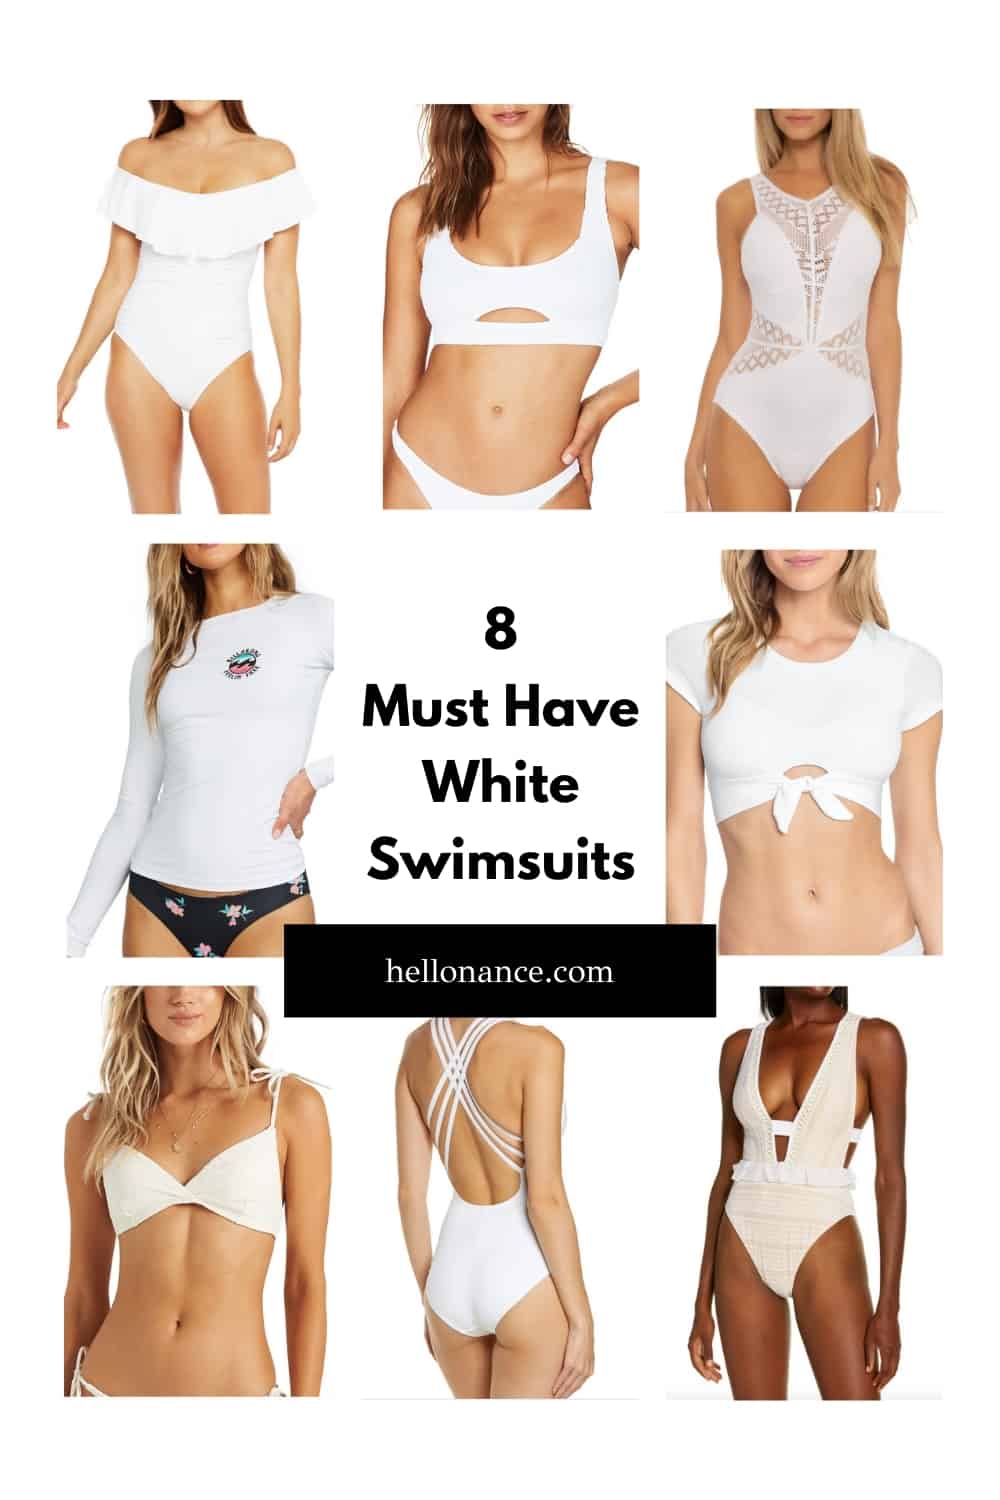 With Summer in full swing, choose an eternally chic favourite like the white swimsuit! Swim ahead with the most flattering bikini and one-piece to stay cool during the hot summer months.